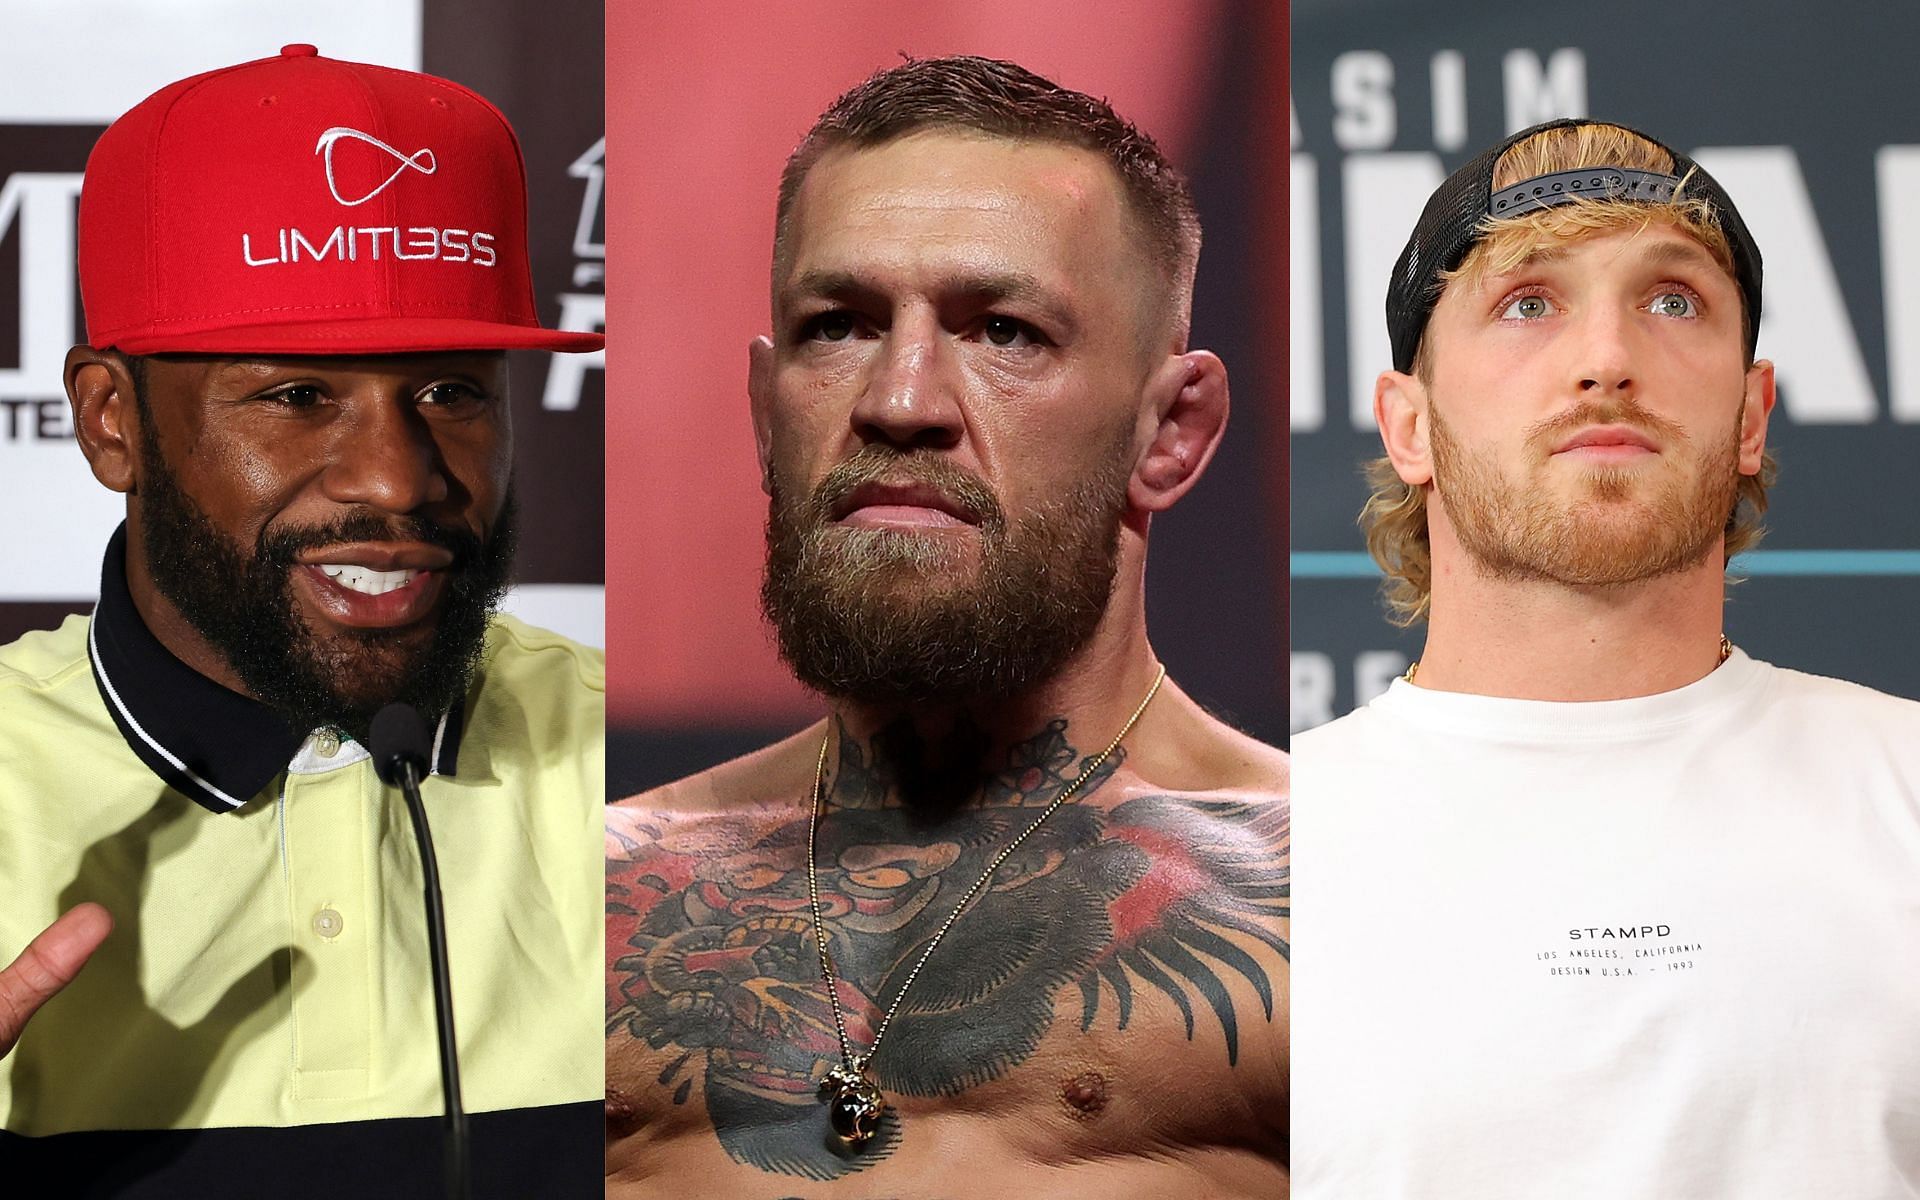 Floyd Mayweather (left) Conor McGregor (center), and Logan Paul (right) (Image credits Getty Images)